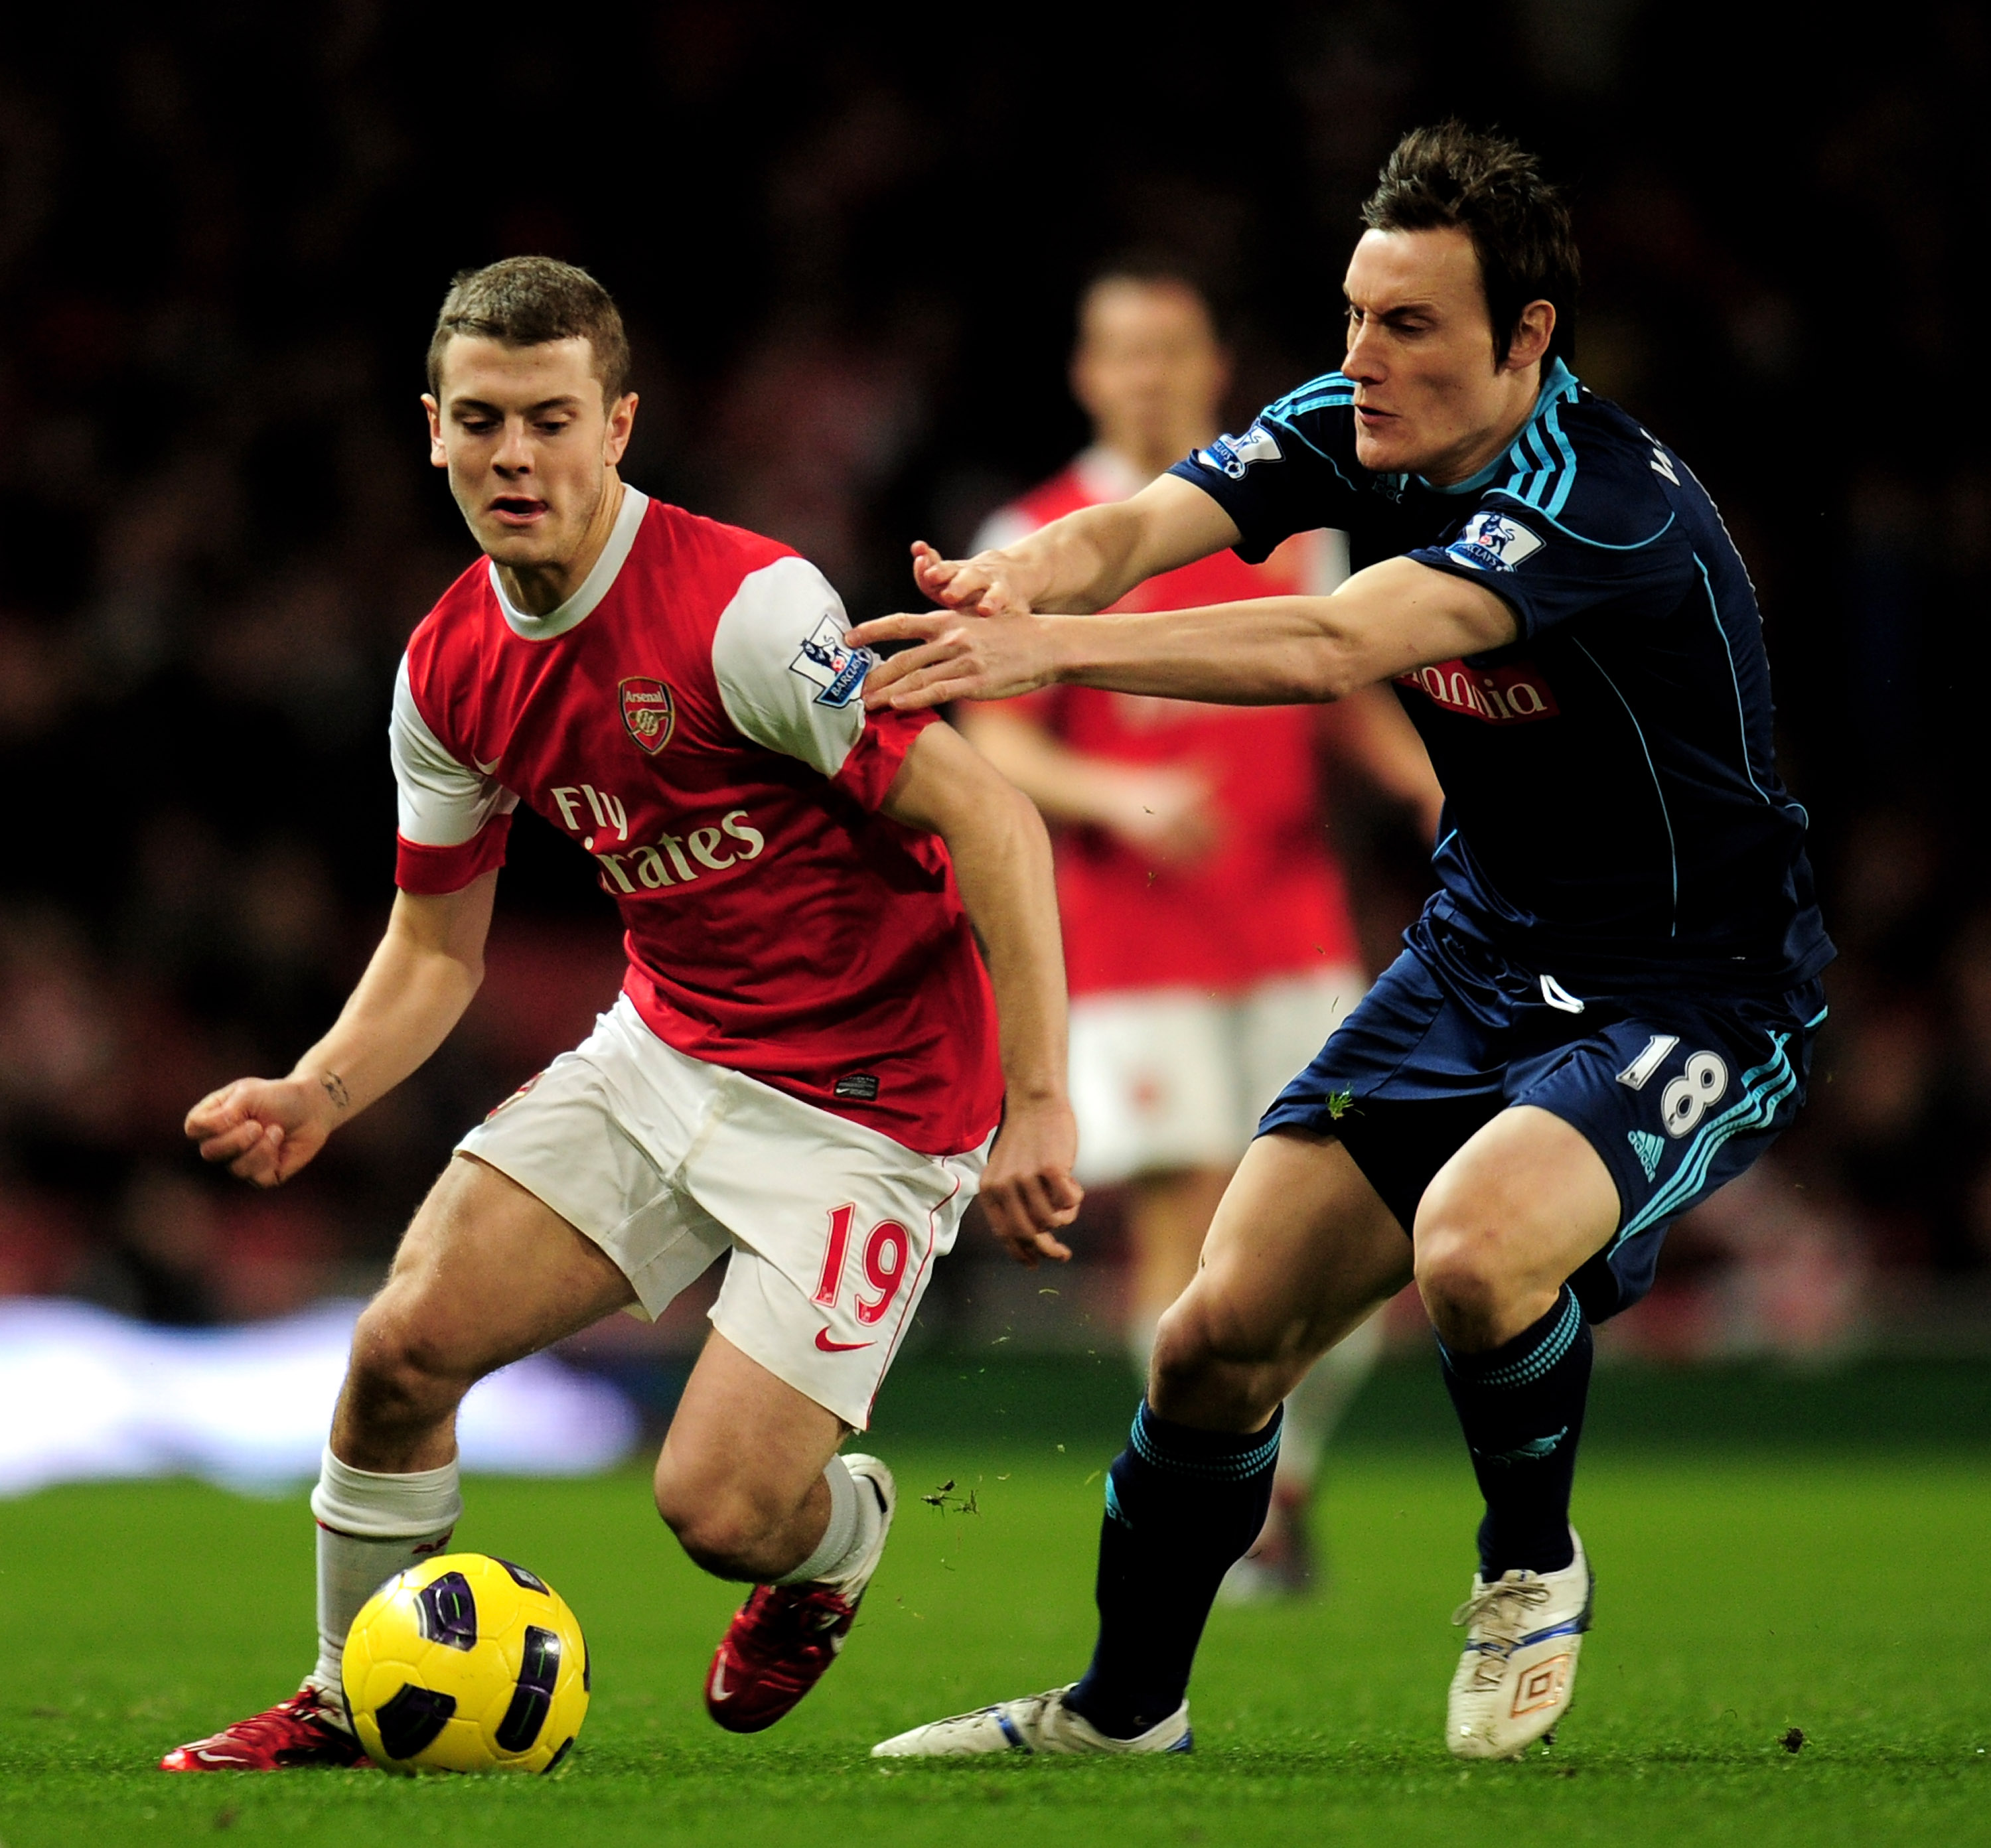 LONDON, ENGLAND - FEBRUARY 23:  Jack Wilshere (L) of Arsenal is challenged by Dean Whitehead of Stoke during the Barclays Premier League match between Arsenal and Stoke City at the Emirates Stadium on February 23, 2011 in London, England.  (Photo by Shaun